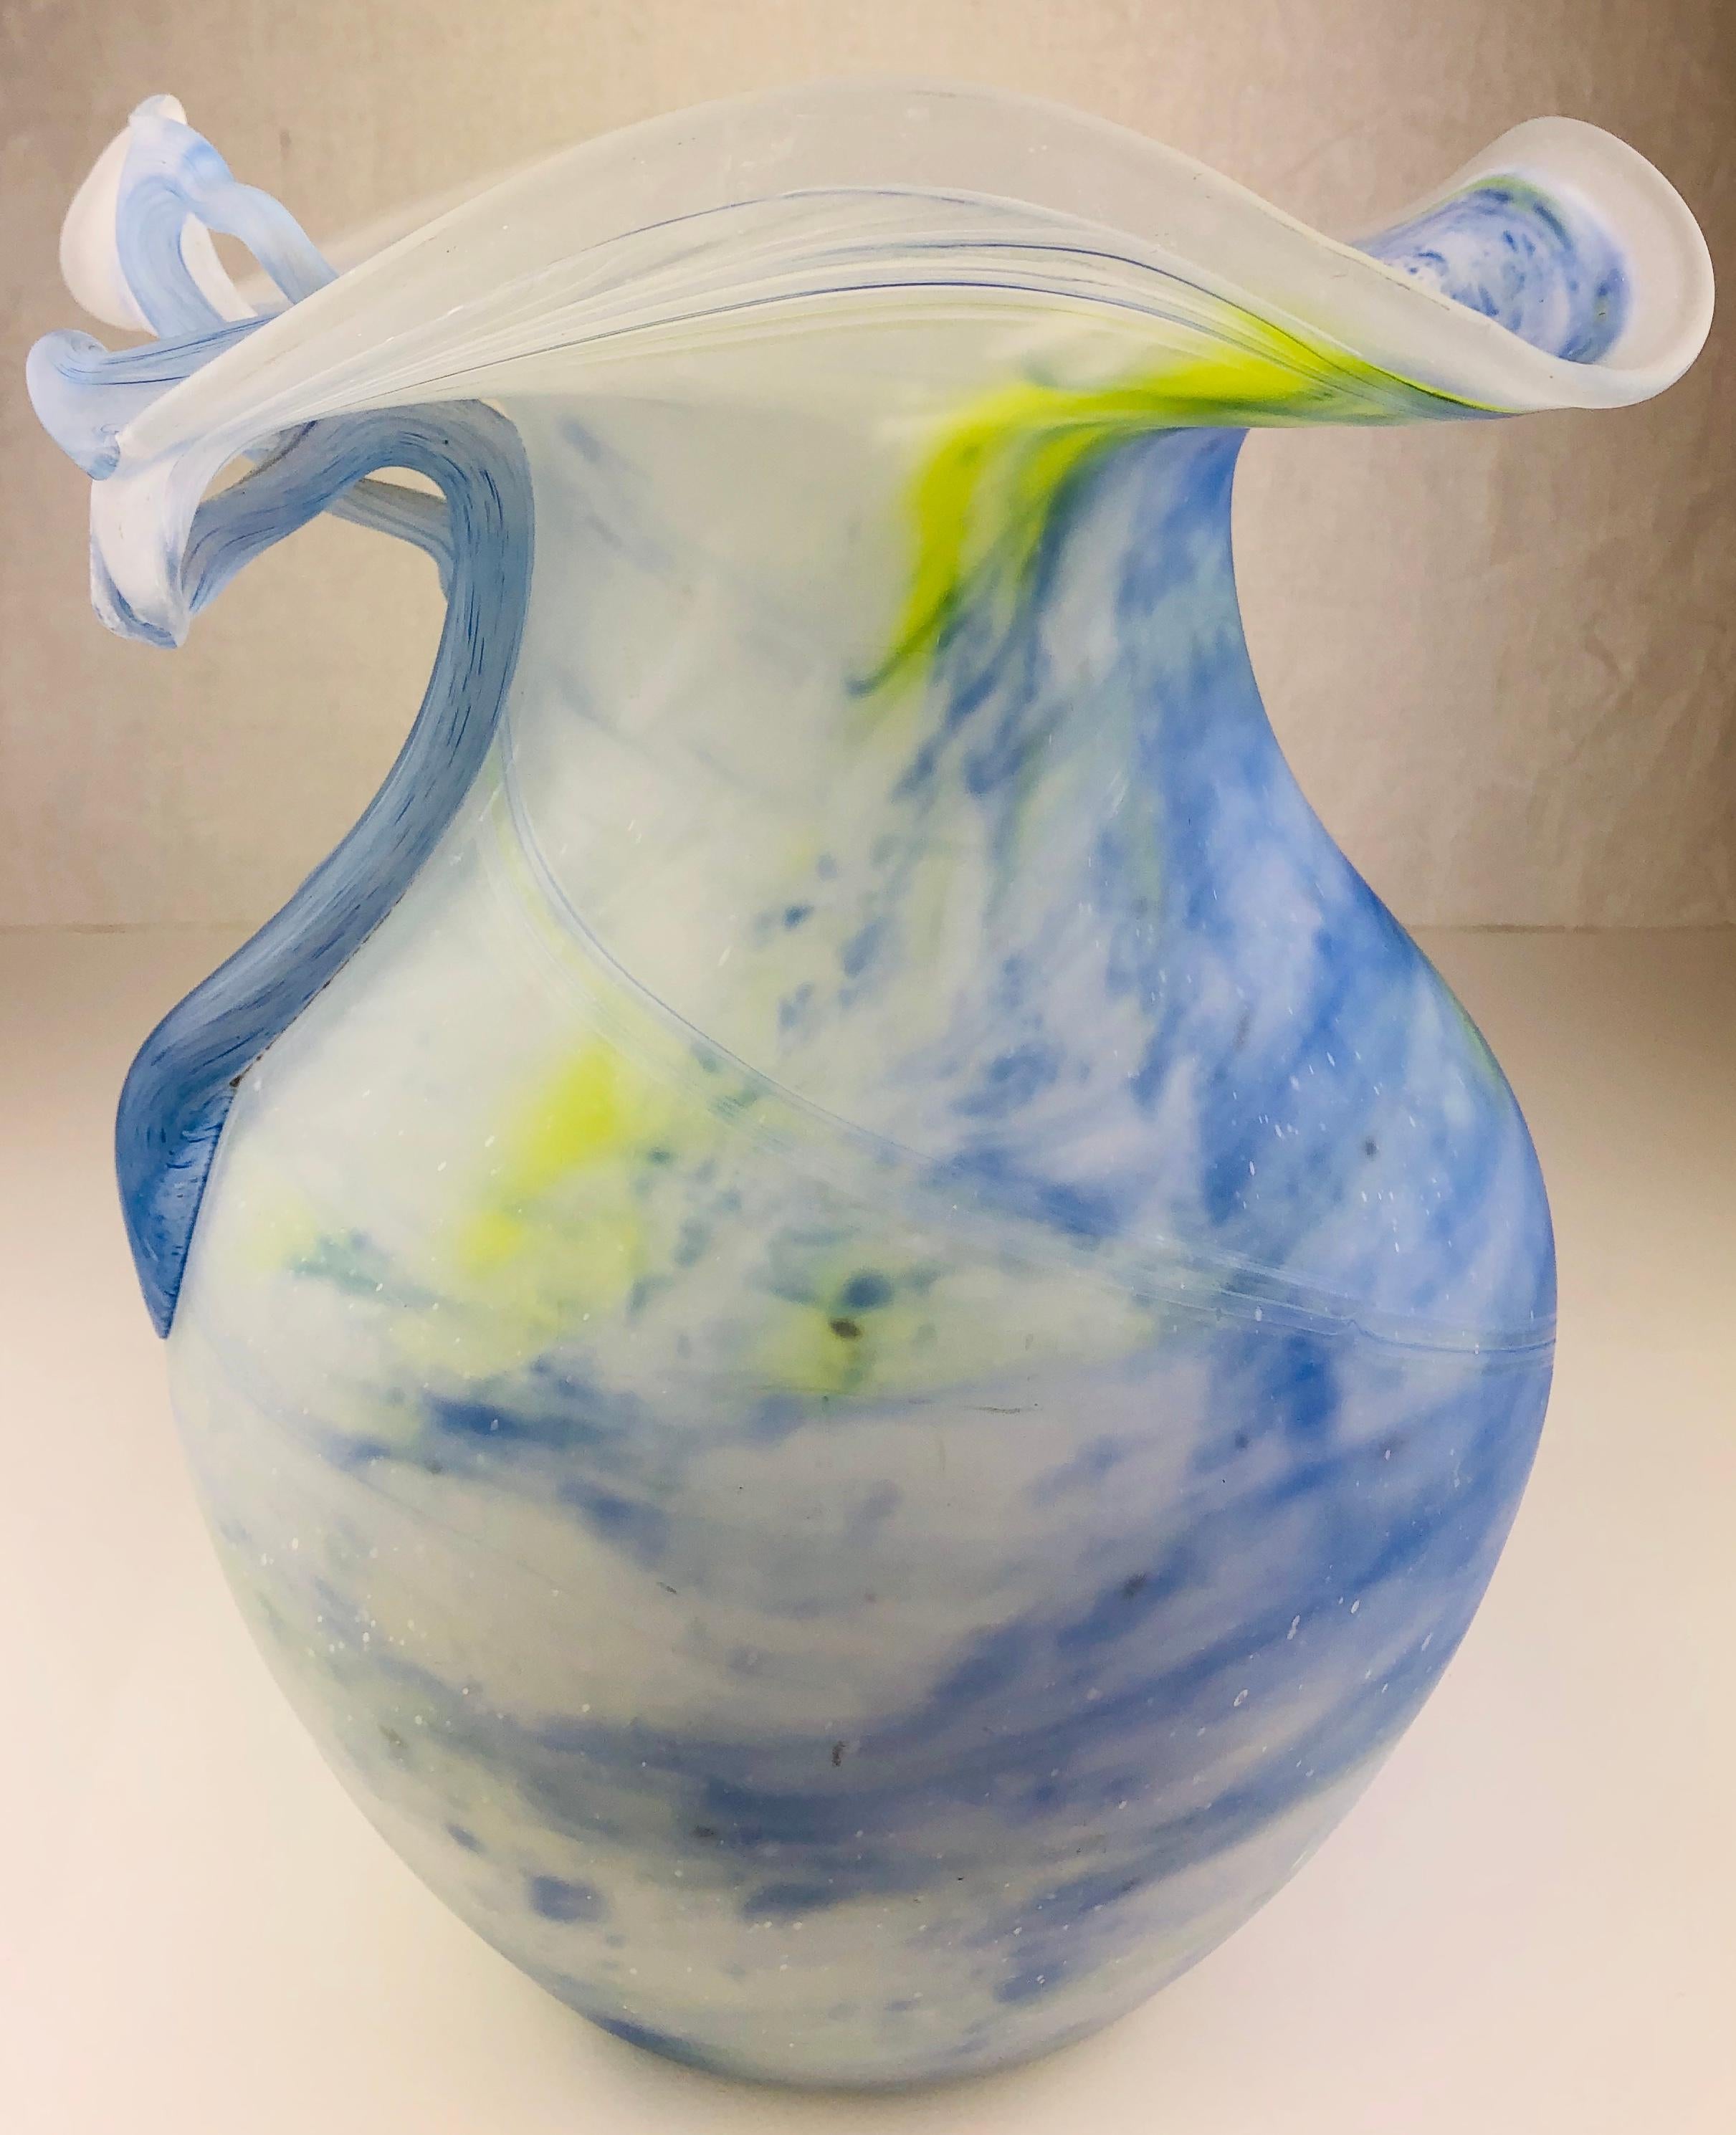 Beautiful French pâte de verre or molten art glass vase. This lovely decorative piece was handcrafted with striking details. 

Double layered blown glass vase in white, light blue and yellow colors. 
Measures: 10